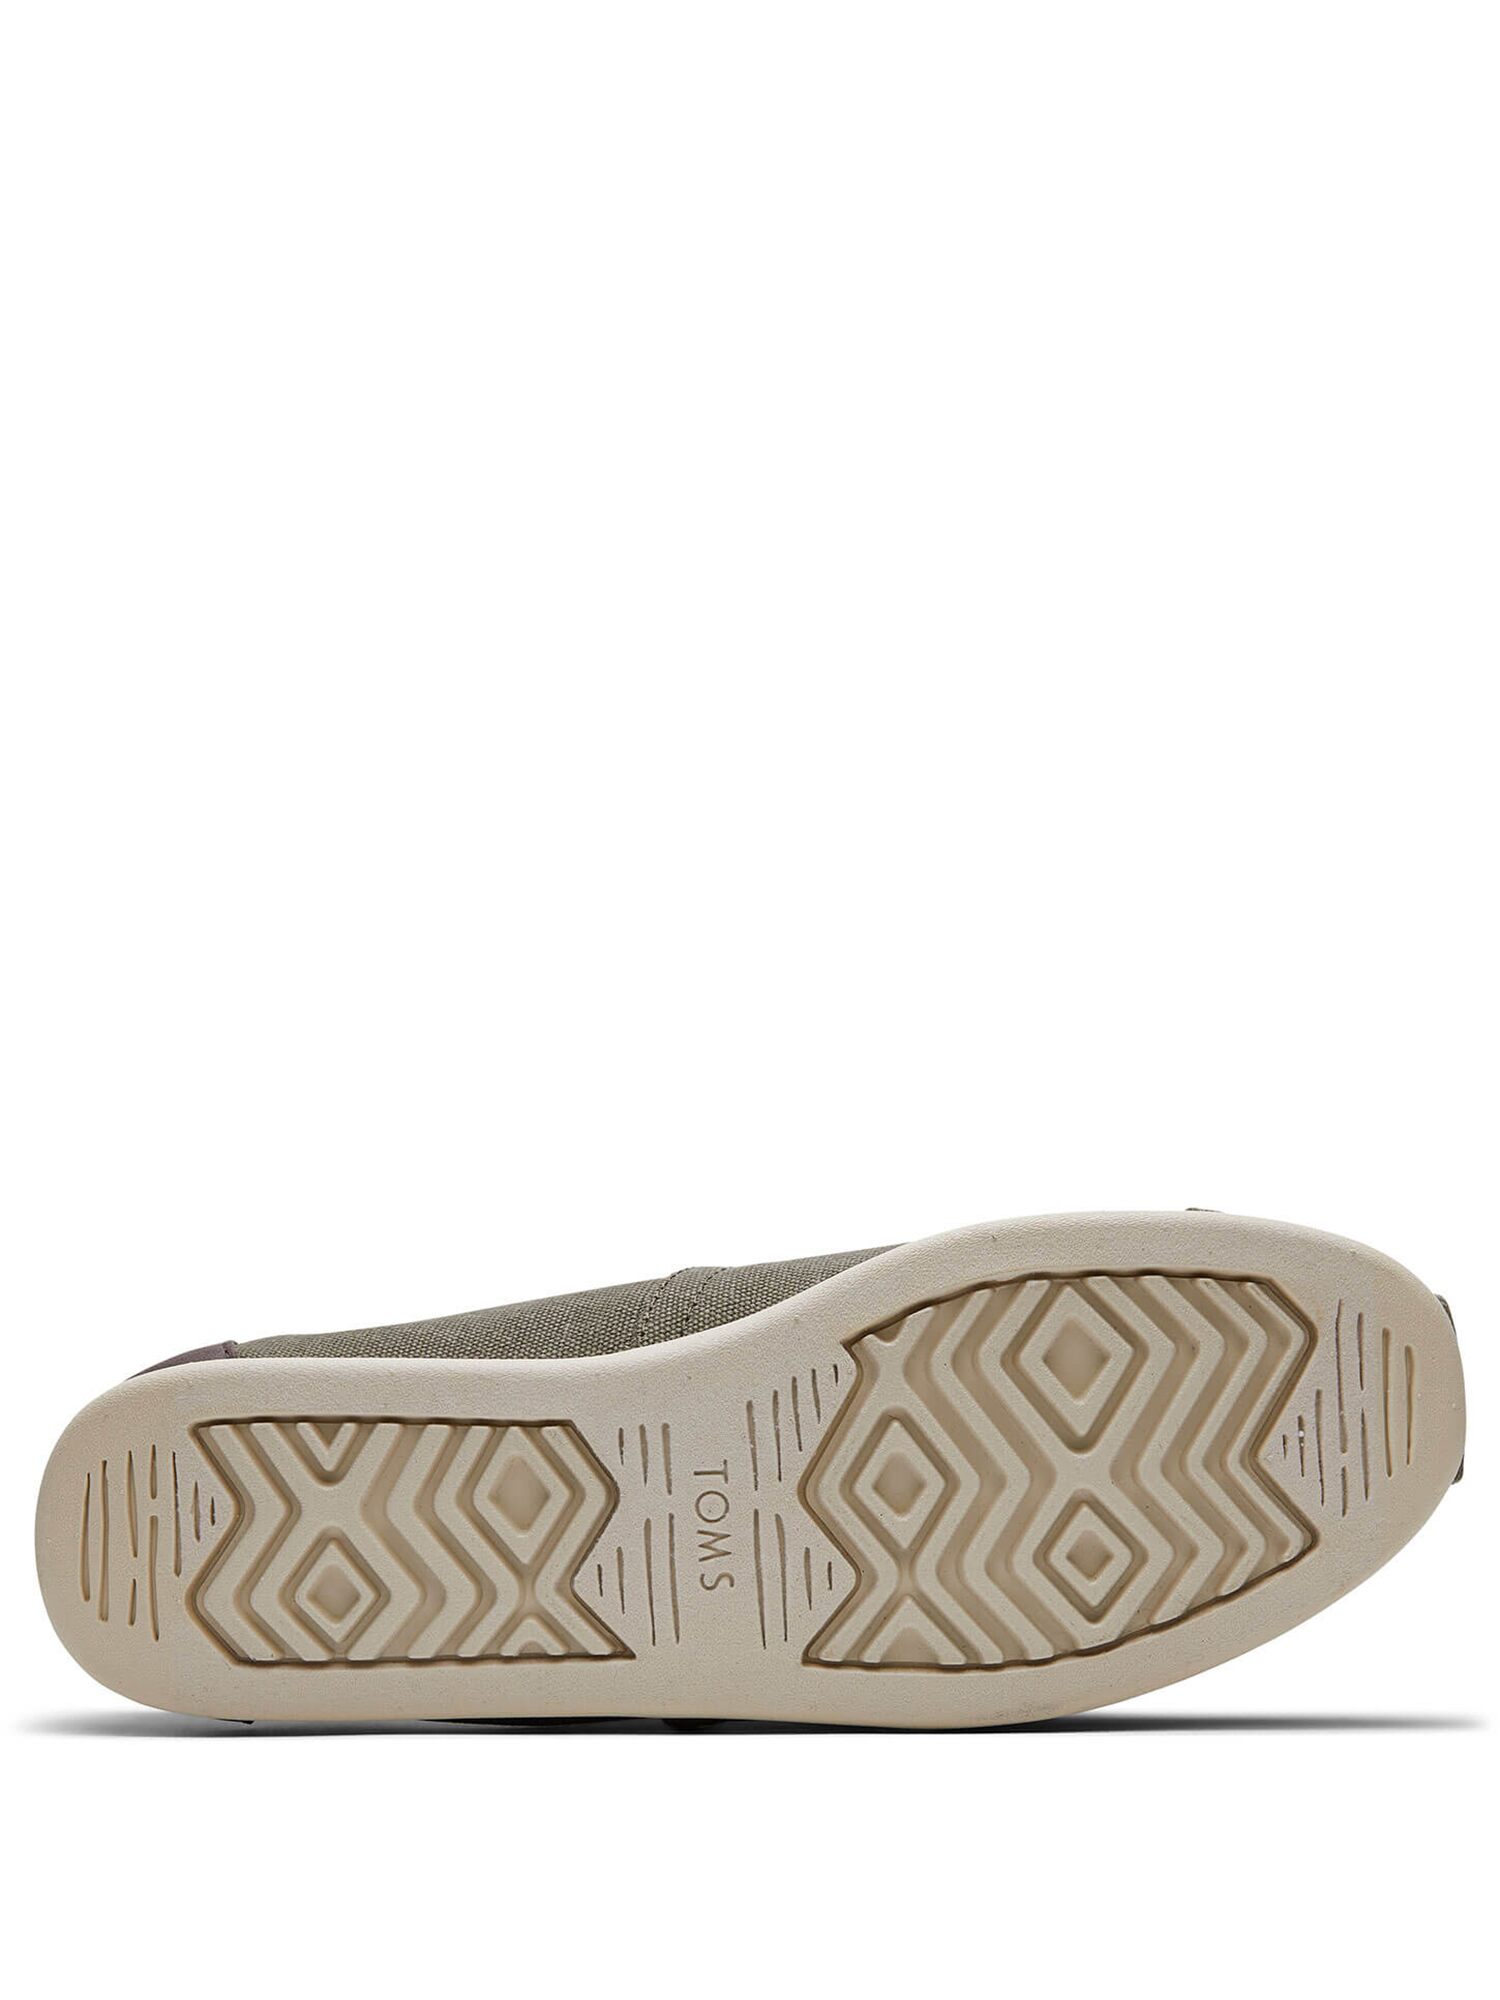 TOMS Men's Washed Canvas Classic Slip-On Shoes ft. Ortholite - image 3 of 3